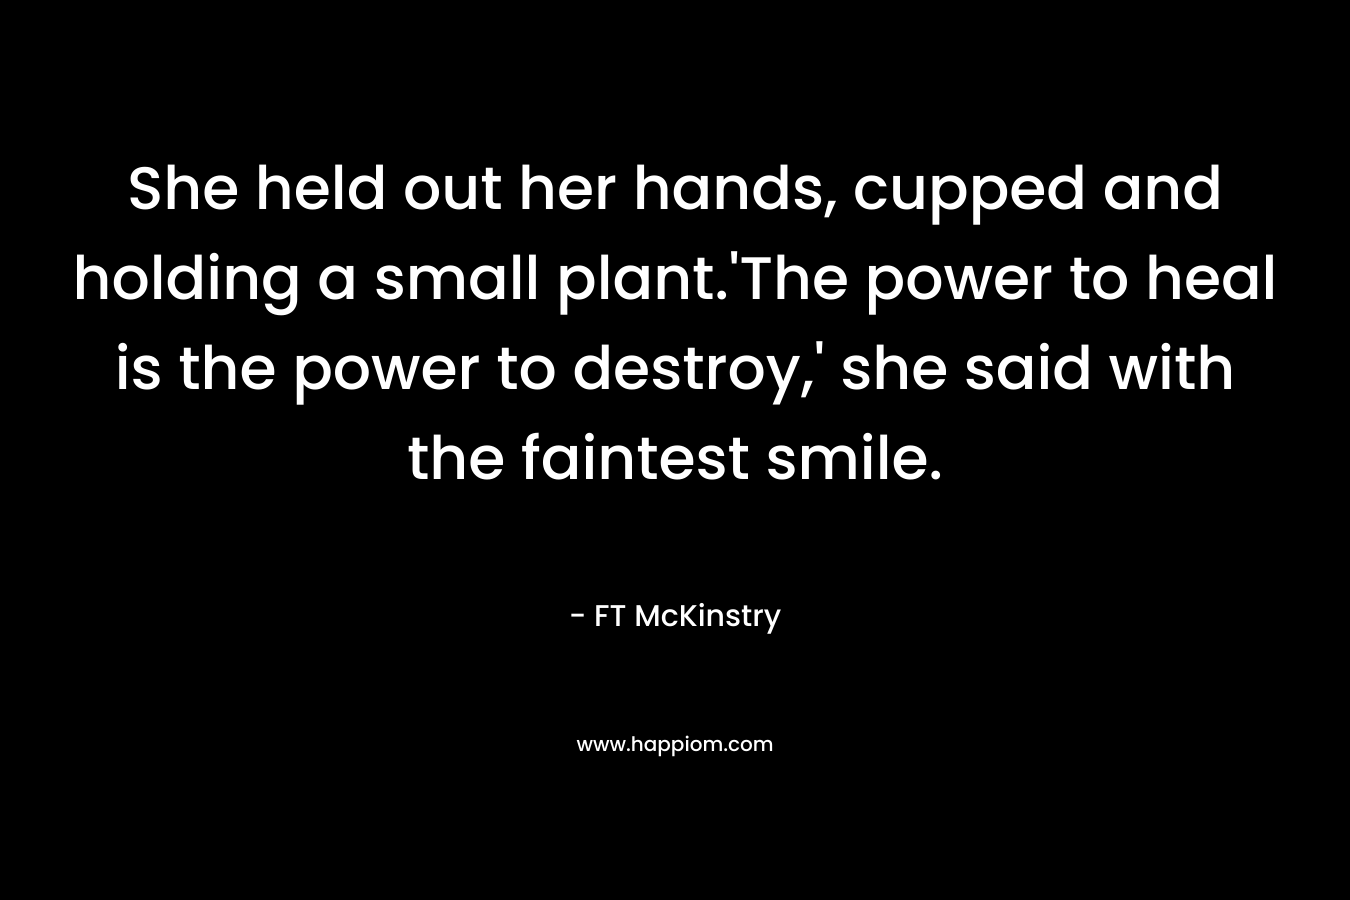 She held out her hands, cupped and holding a small plant.’The power to heal is the power to destroy,’ she said with the faintest smile. – FT McKinstry